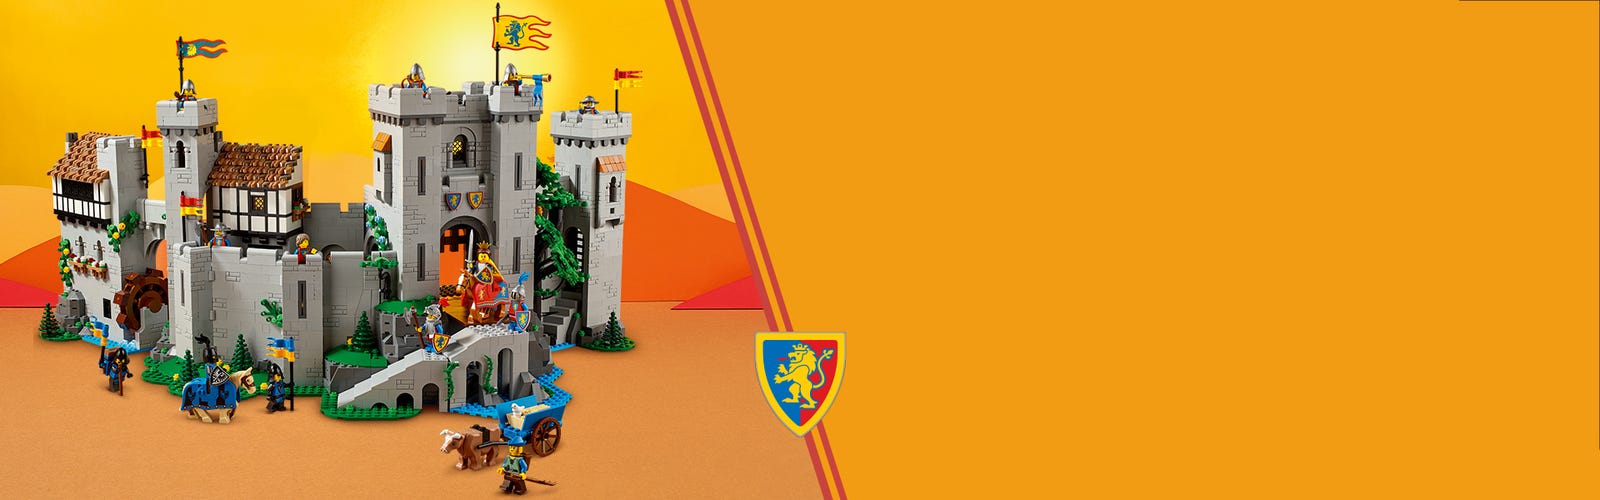 Medieval Lion Knights Church Building Kit, Medieval Series Building Set,  Compatible with Lego (1449PCS)